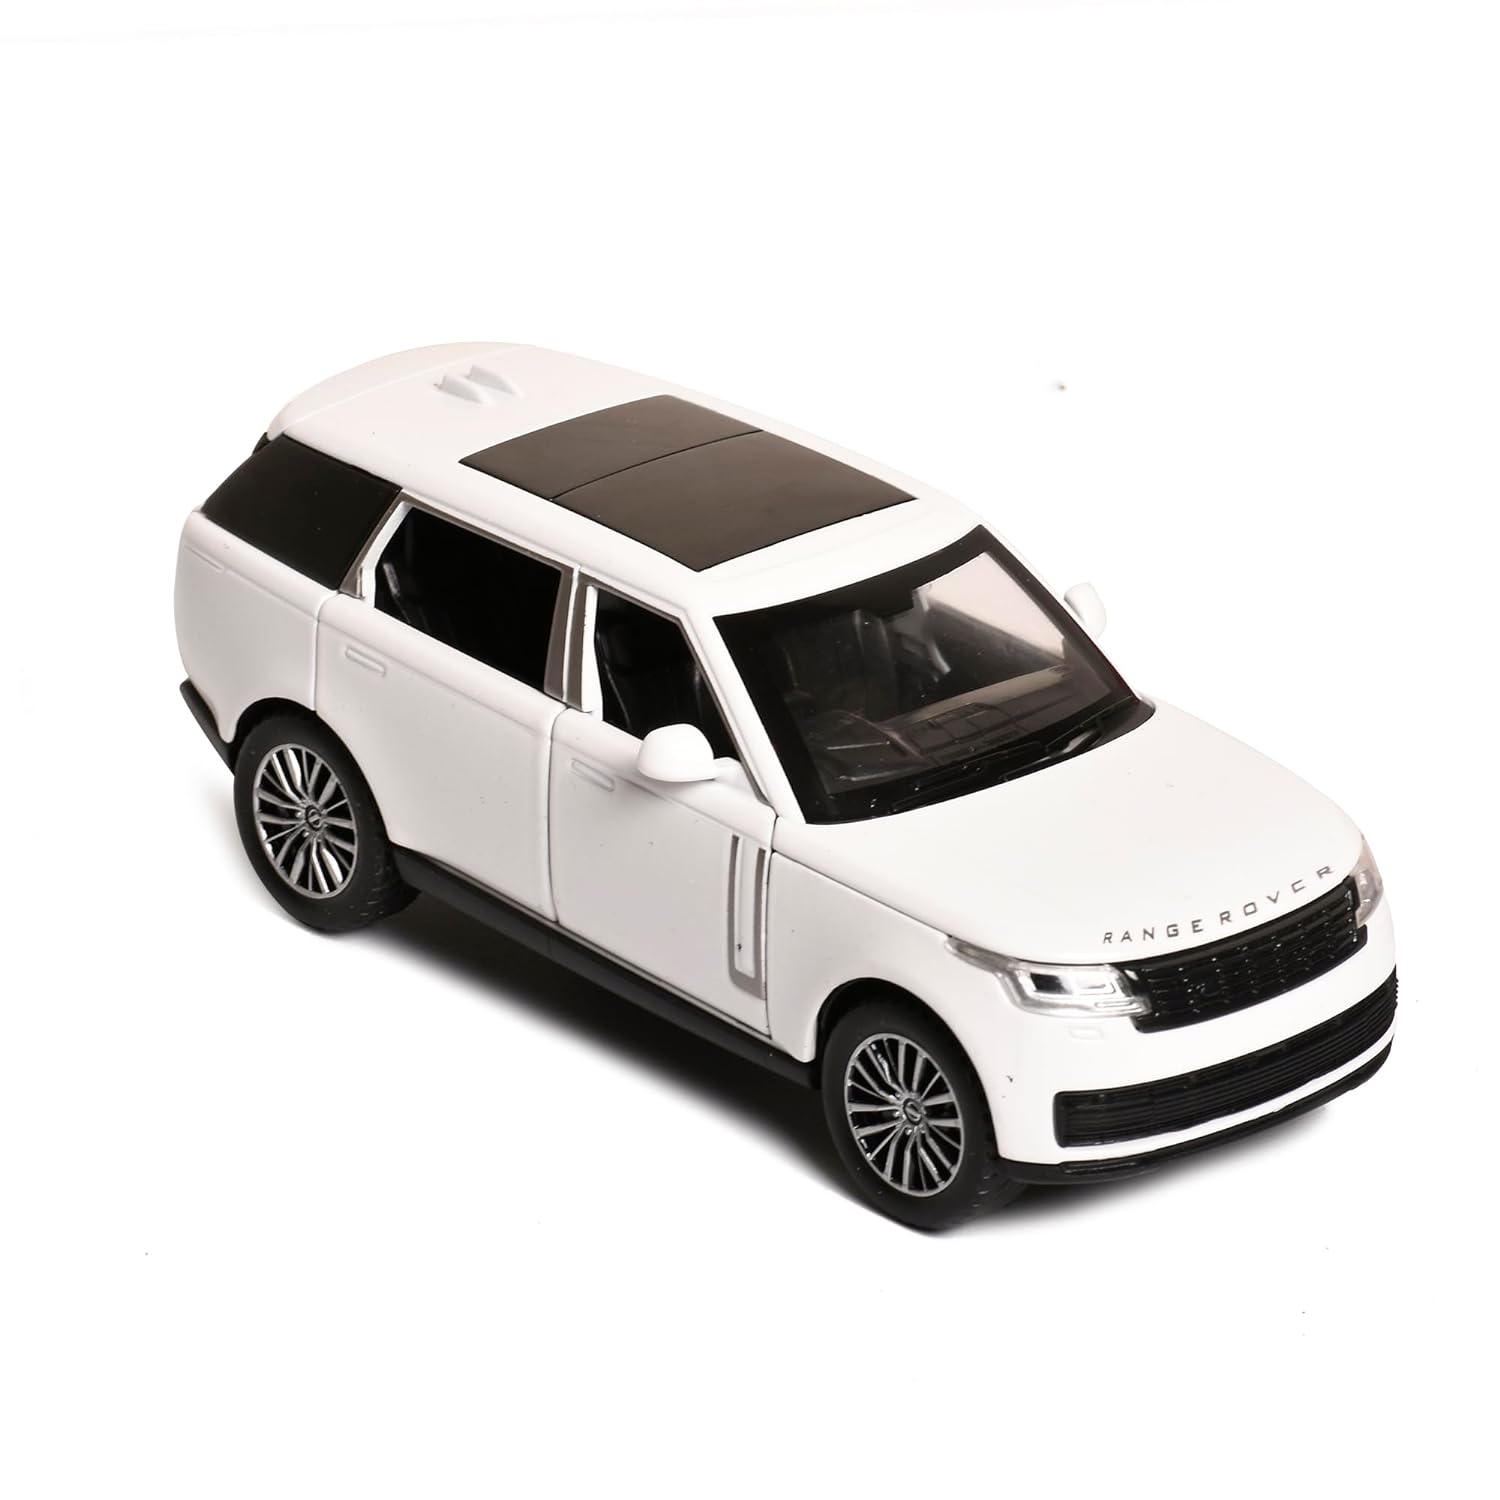 Braintastic Model Diecast Car Toy Vehicle Pull Back Friction Car with Openable Doors Light & Music Toys for Kids Age 3+ Years (AK Metal Series Range Rover White)